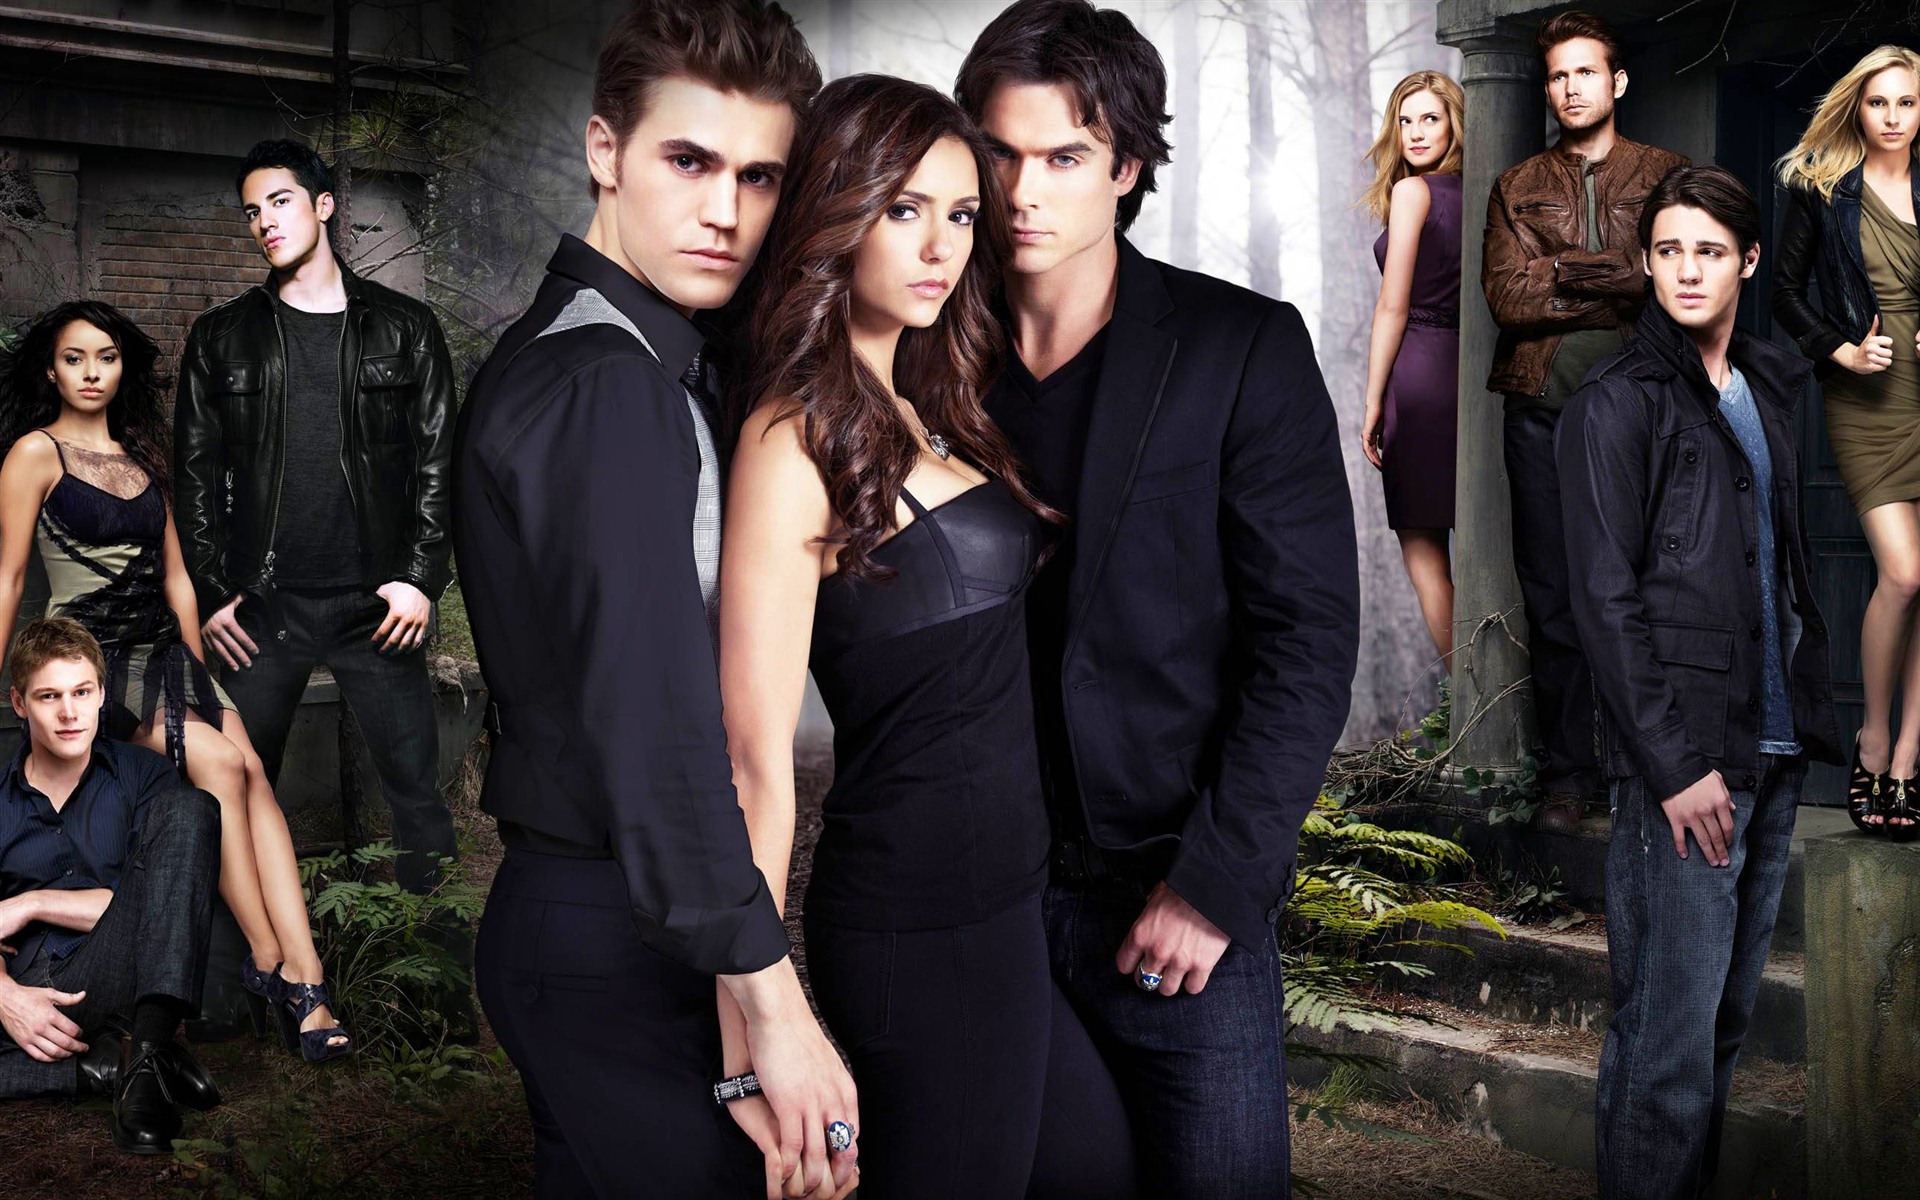 The Vampire Diaries HD Wallpapers #12 - 1920x1200